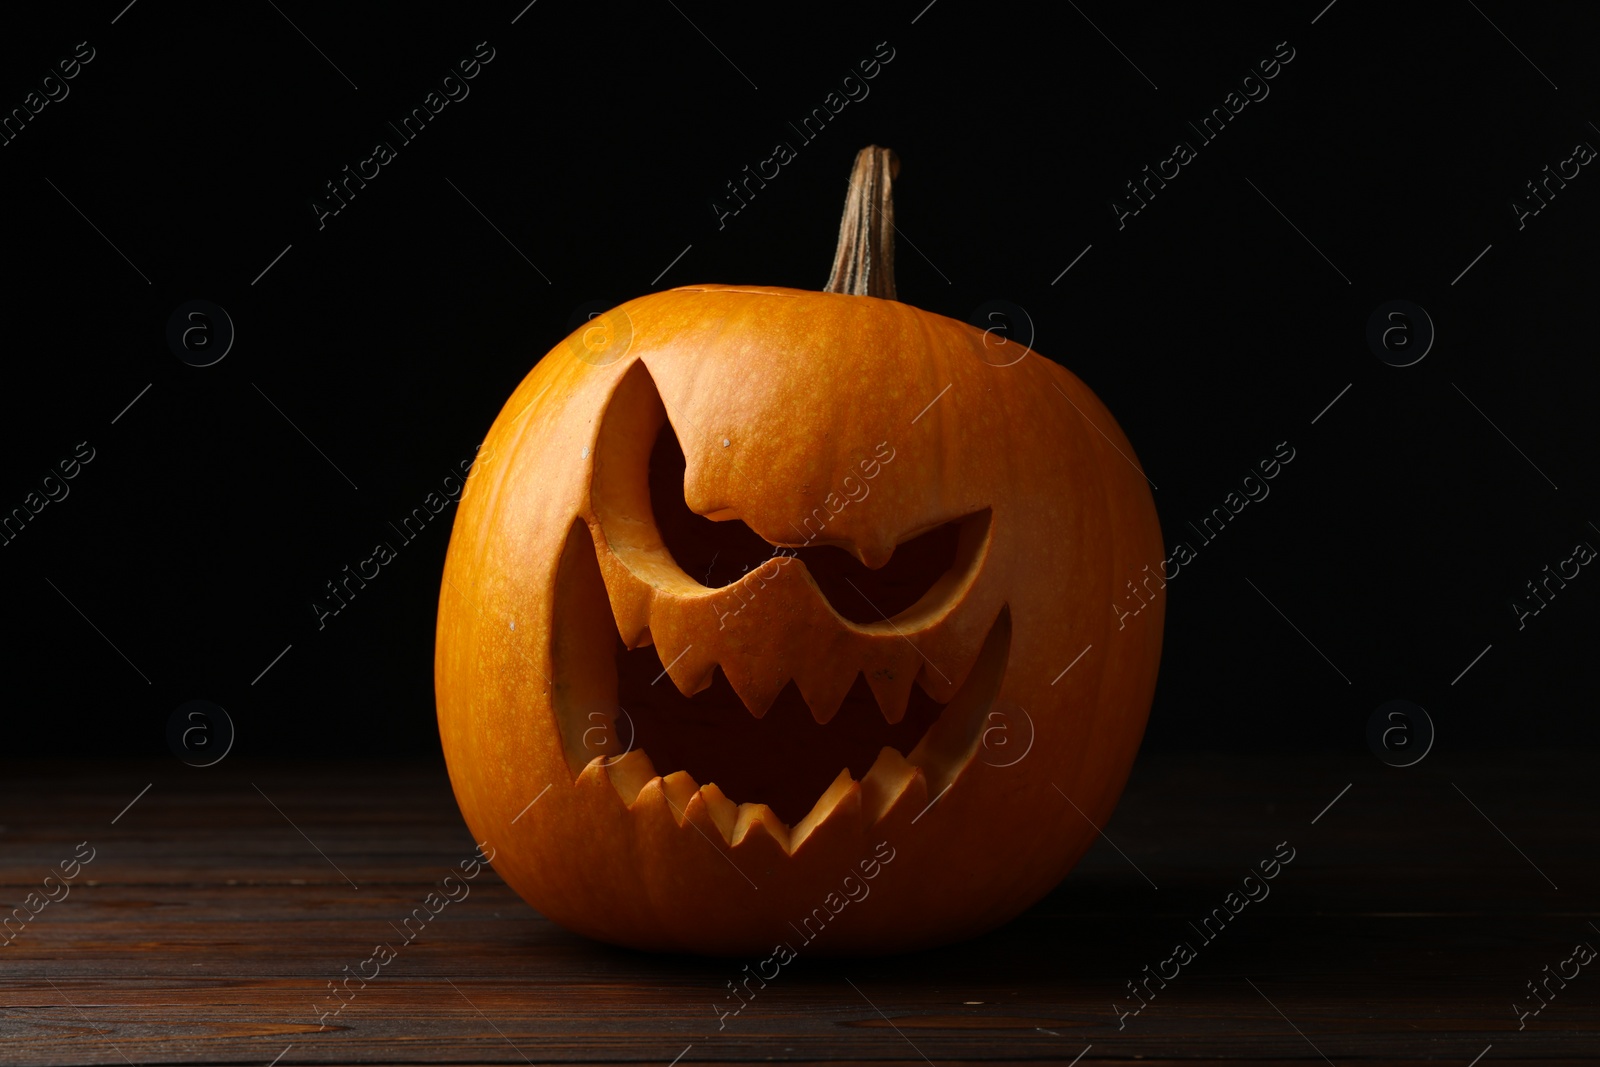 Photo of Scary jack o'lantern made of pumpkin on wooden table in darkness. Halloween traditional decor